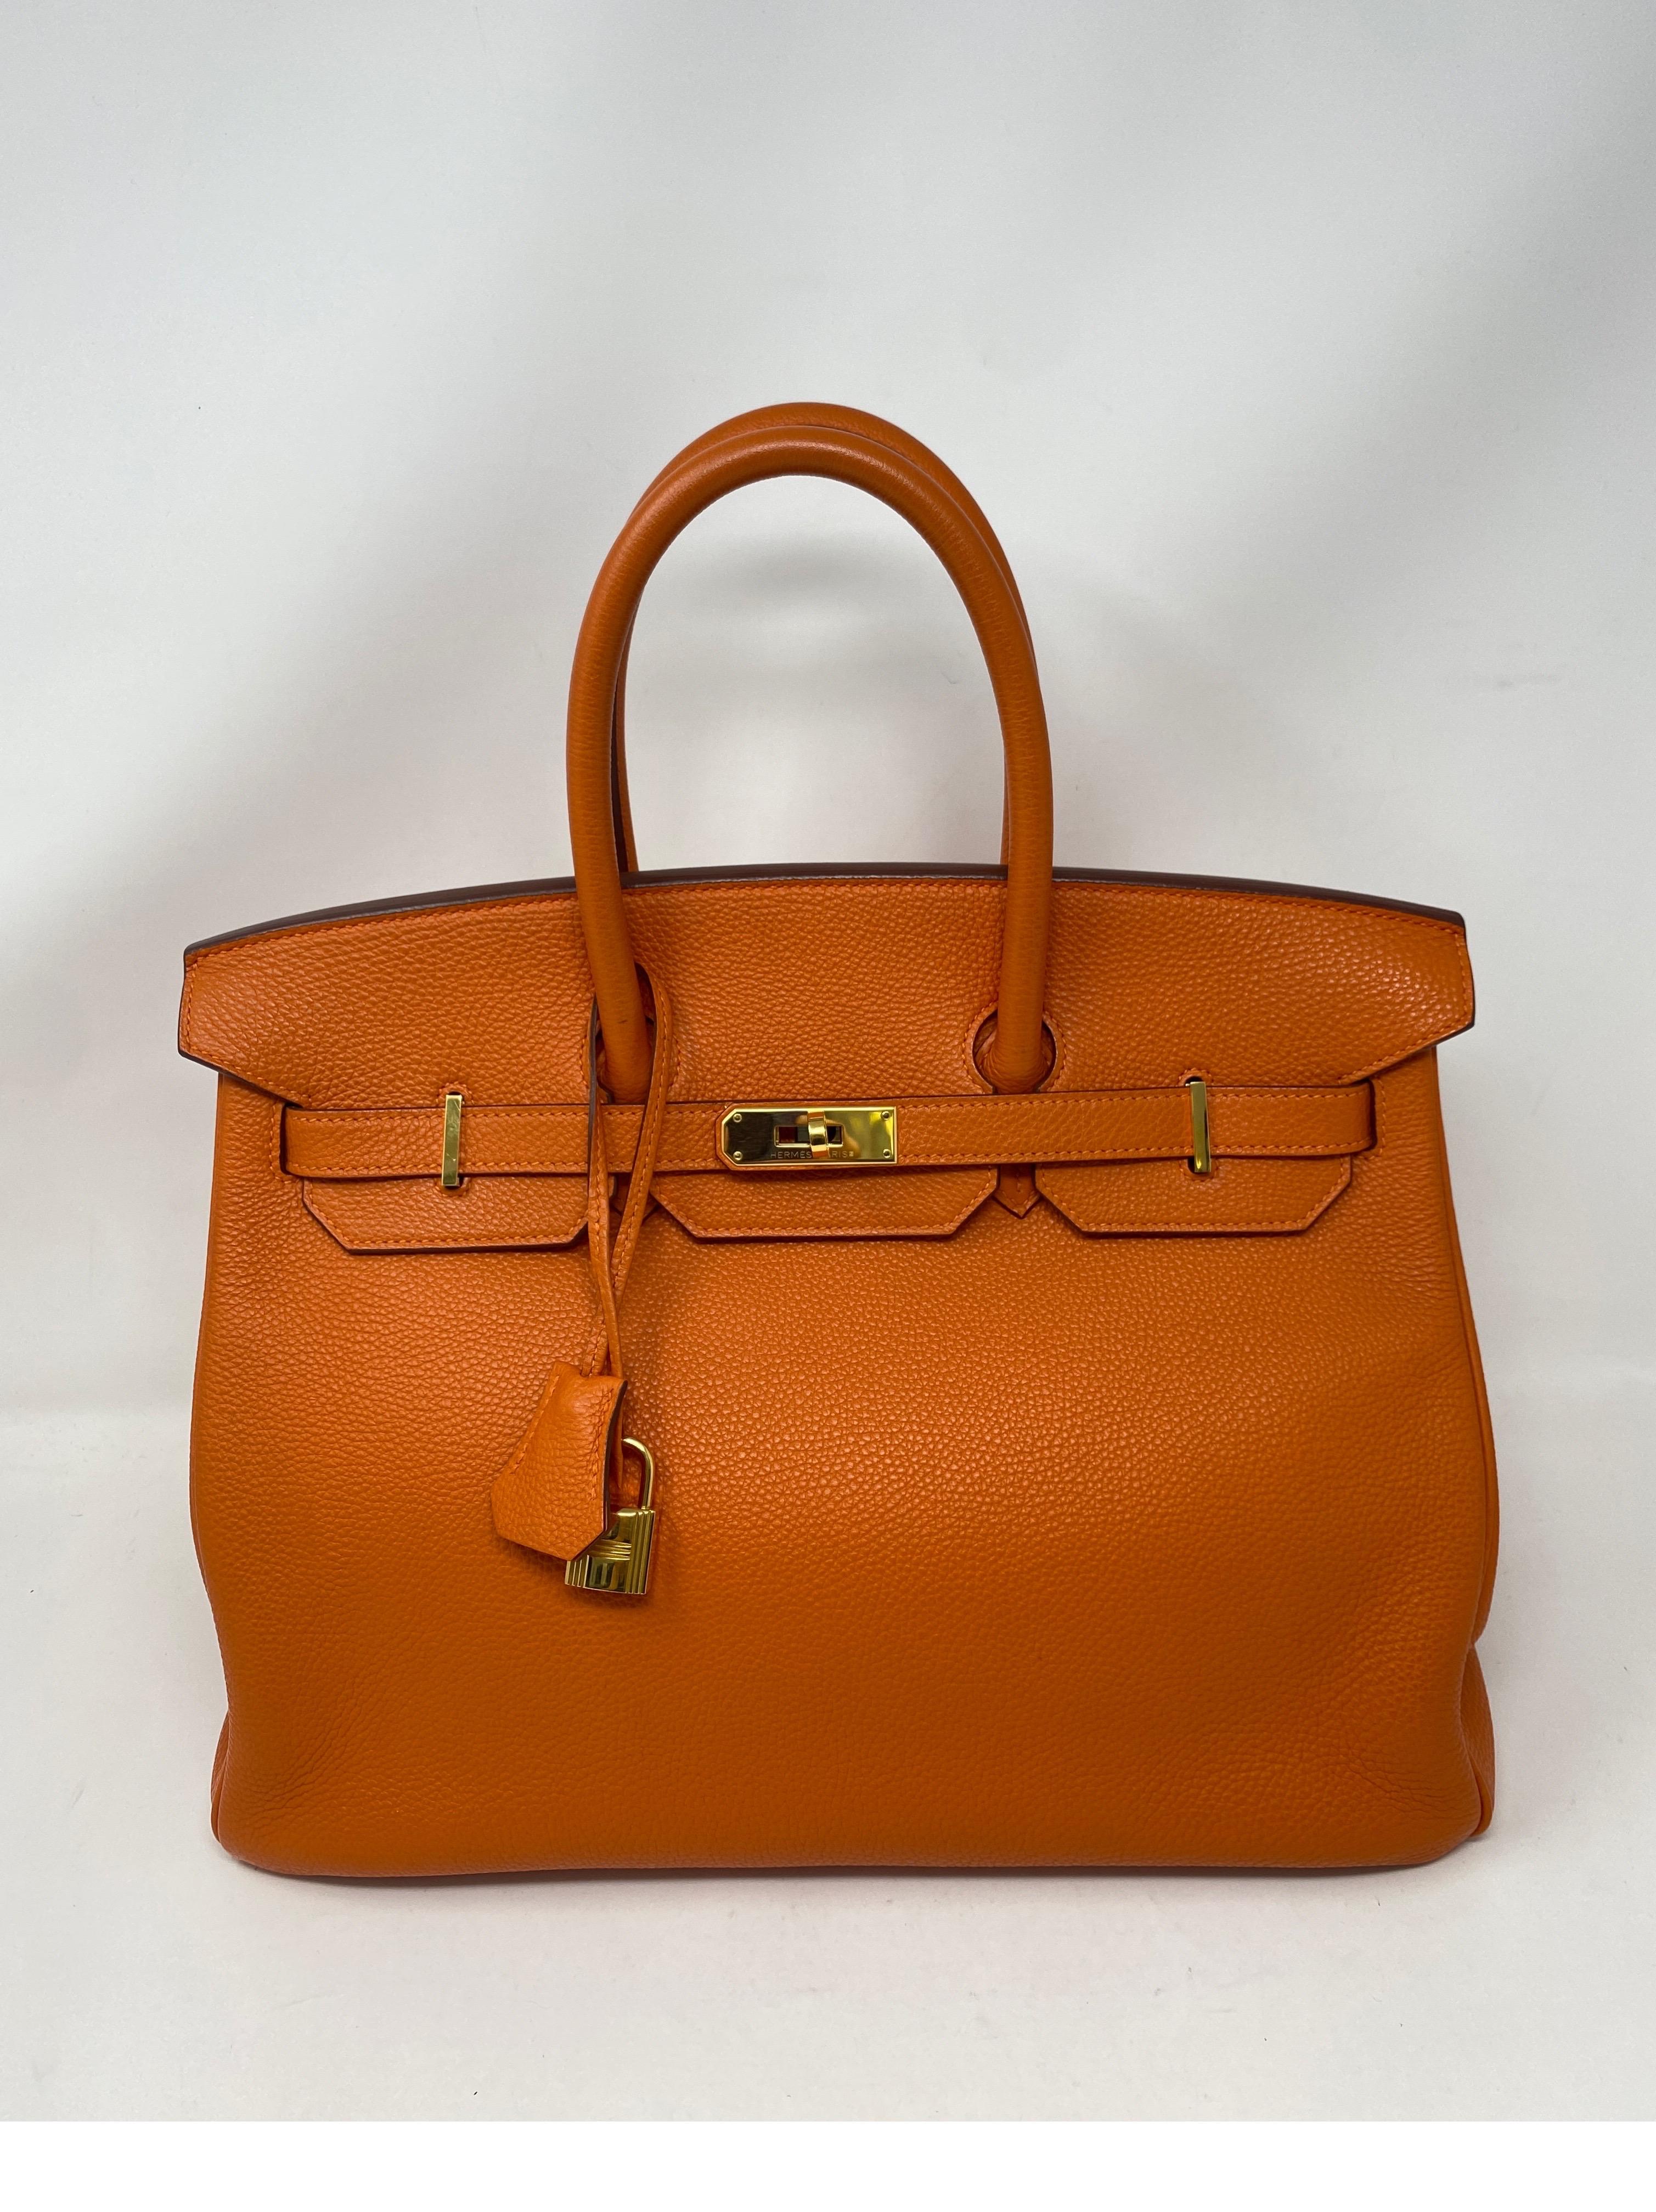 Hermes Birkin 35 Feu Orange Bag. Beautiful vibrant and rare orange color. Gold hardware. Excellent condition. Most wanted combo. Great investment bag. Includes clochette, lock, keys, and dust cover. Guaranteed authentic. 